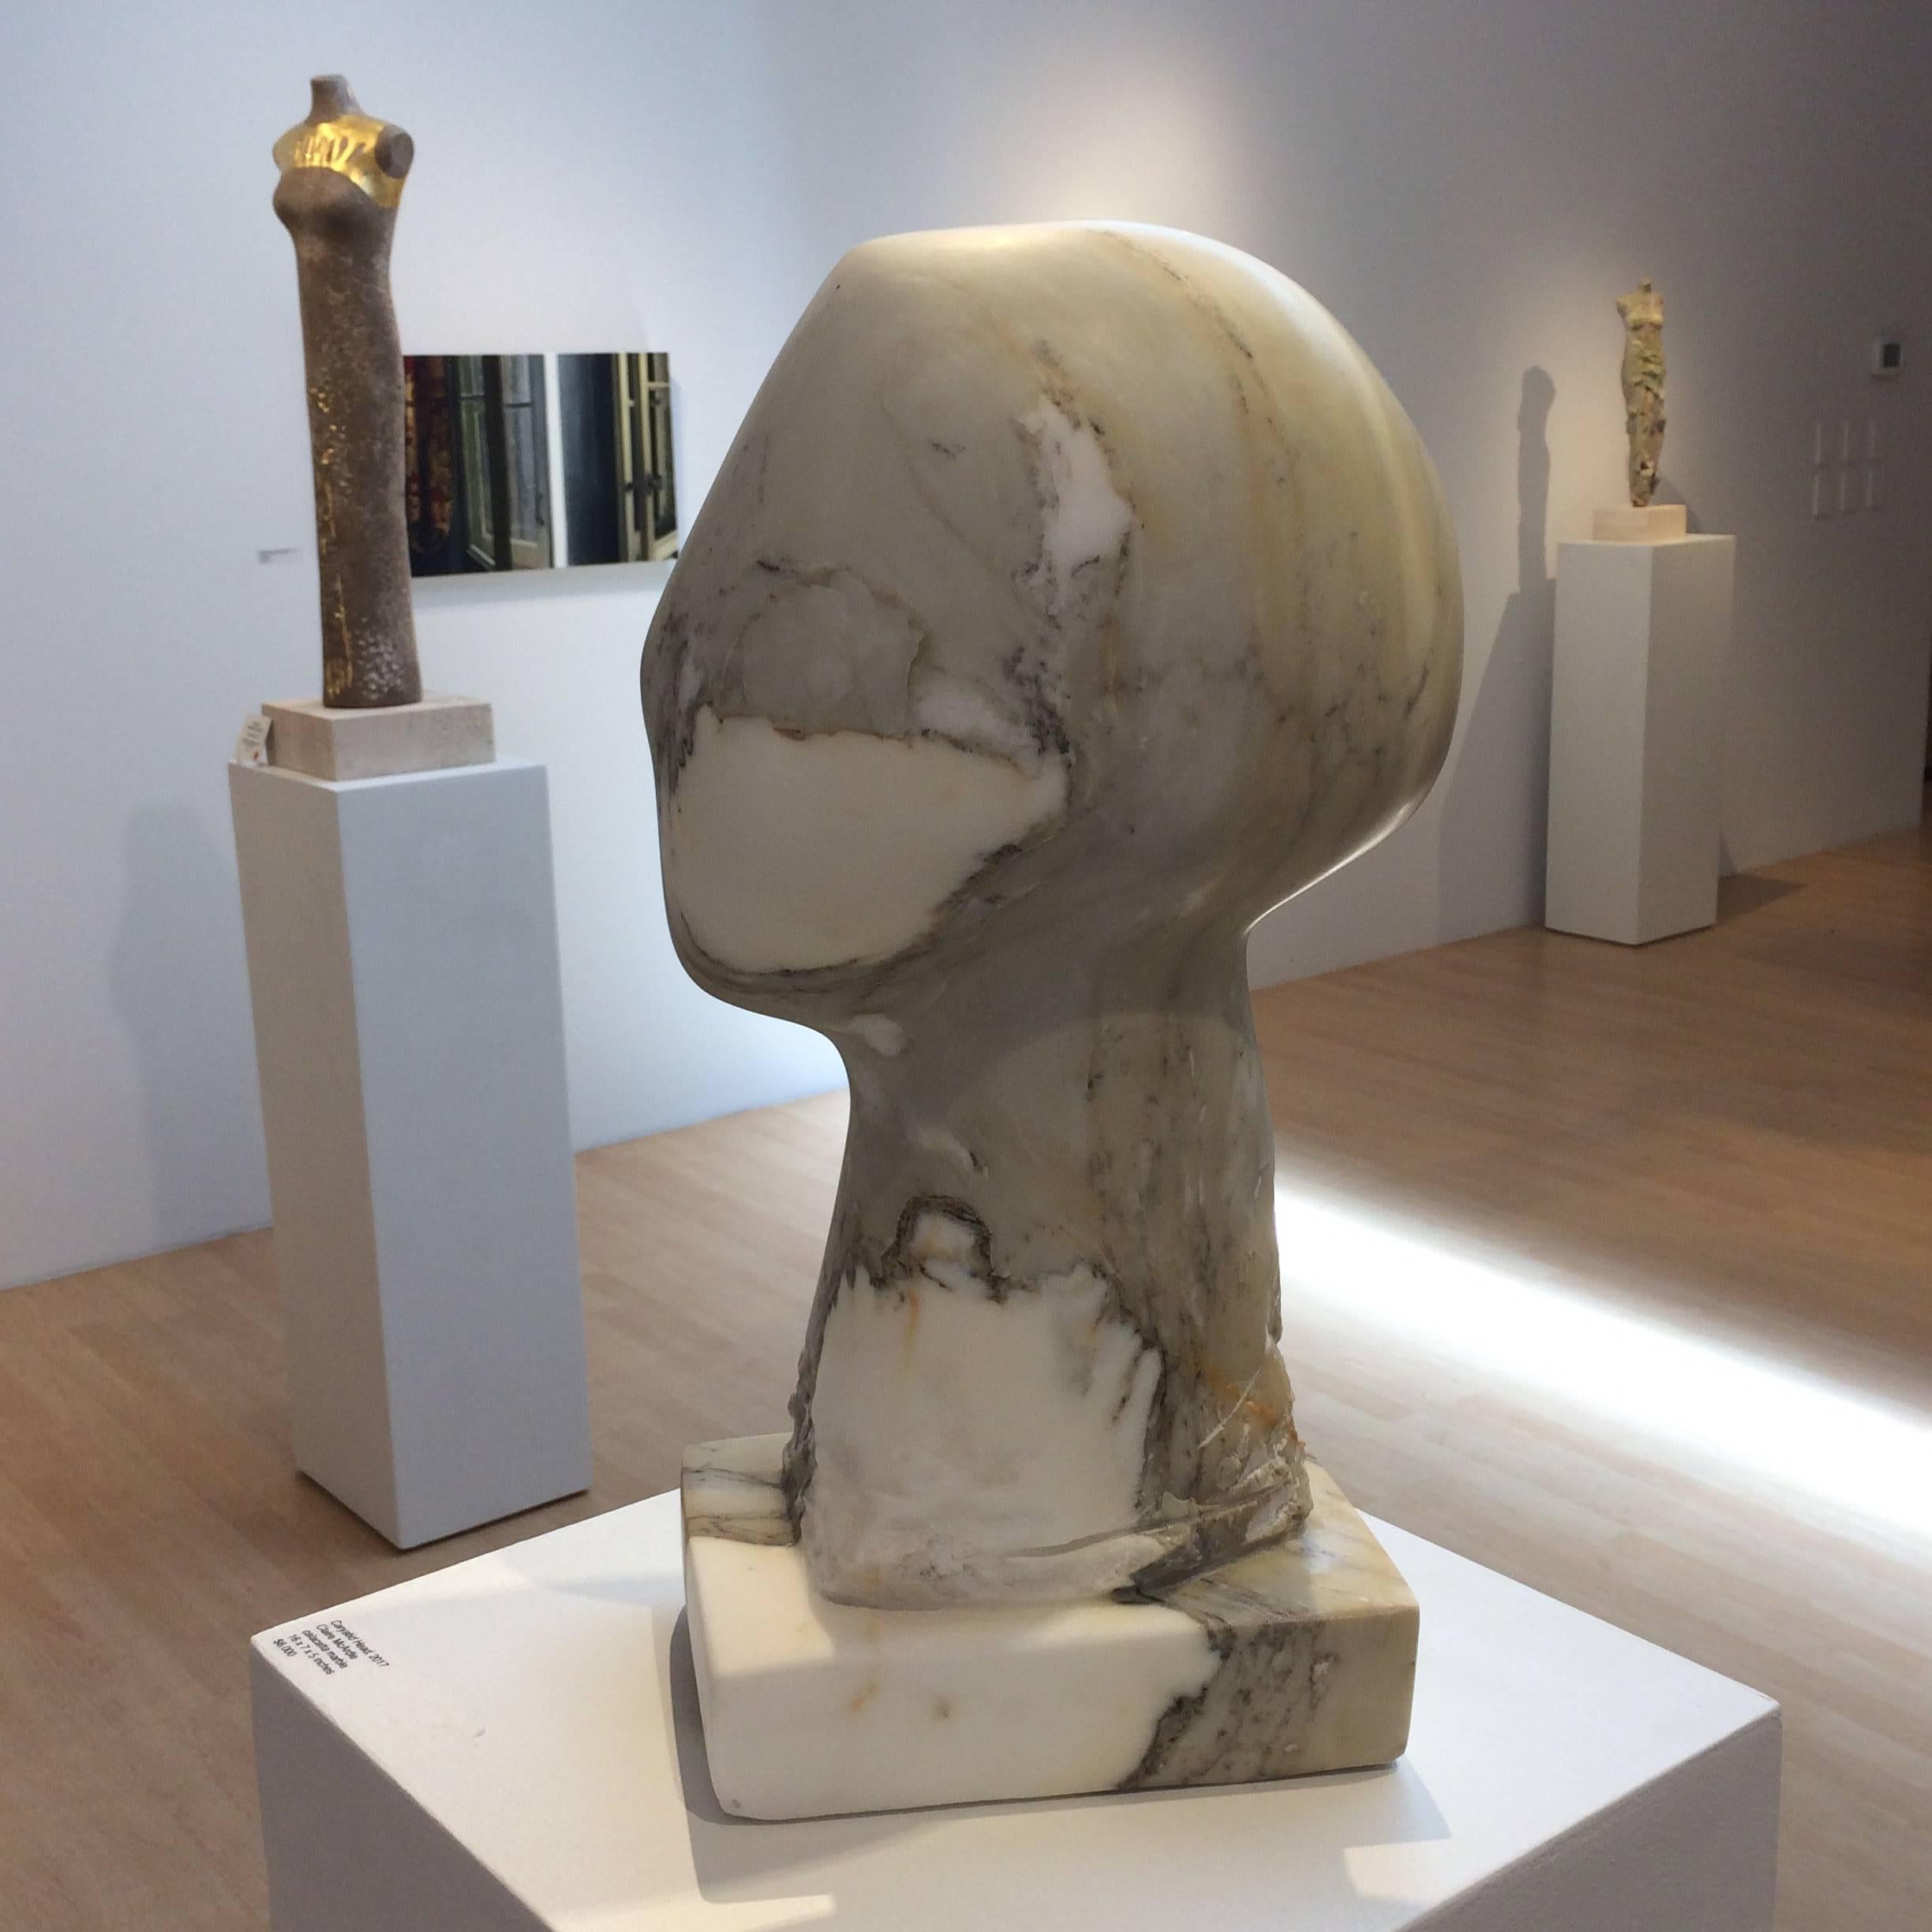 Claire McArdle is an internationally recognized sculptor. After earning a Bachelor in Fine Arts from Virginia Commonwealth University in 1981, she moved to Italy in 1988 to work with the master carvers in Carrara. She continues to travel to Italy to